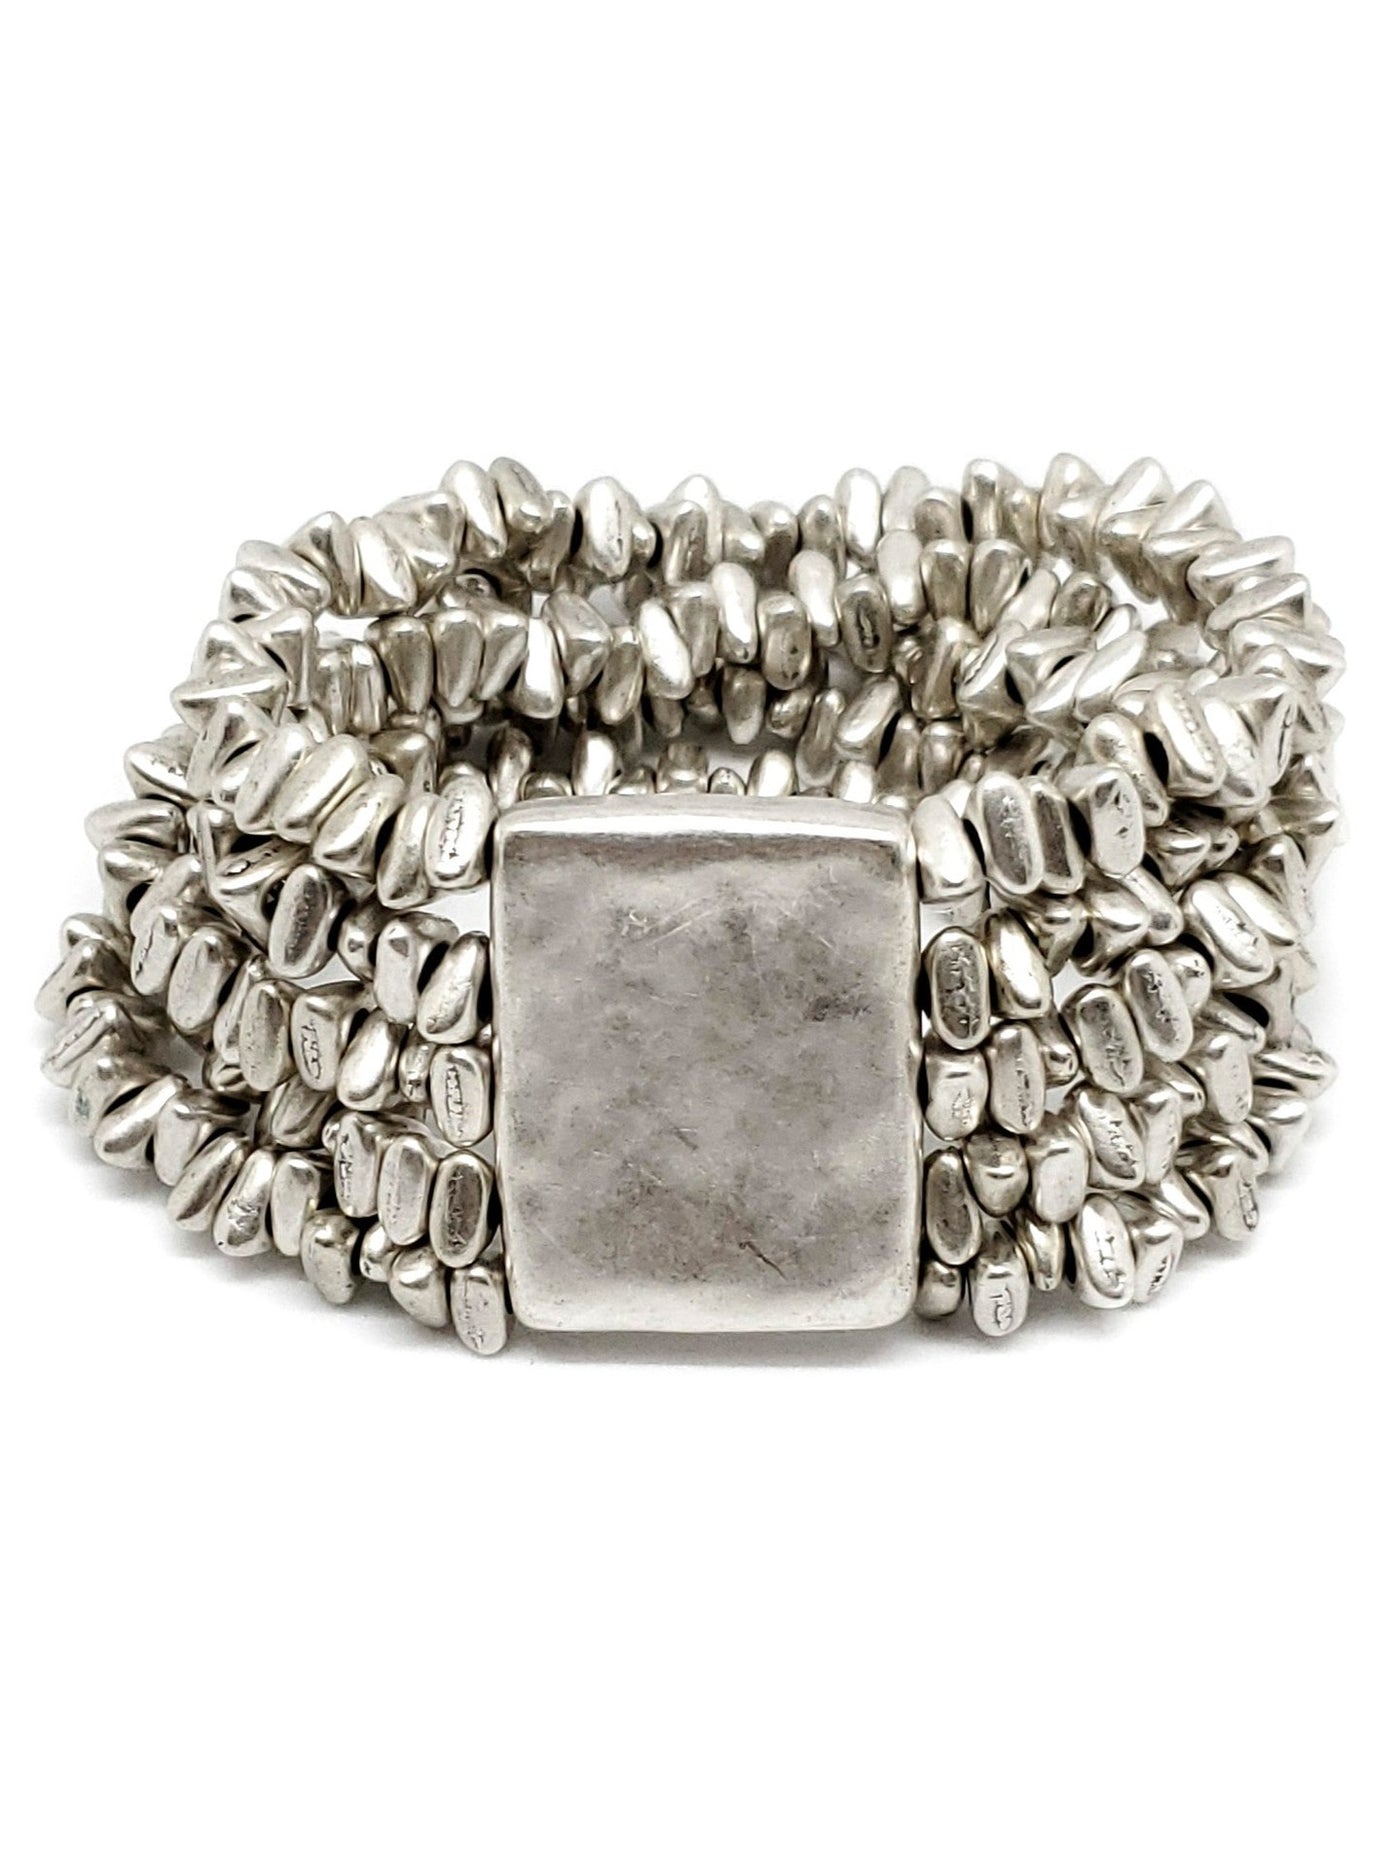 Silver Plated Beaded Stack Bracelet